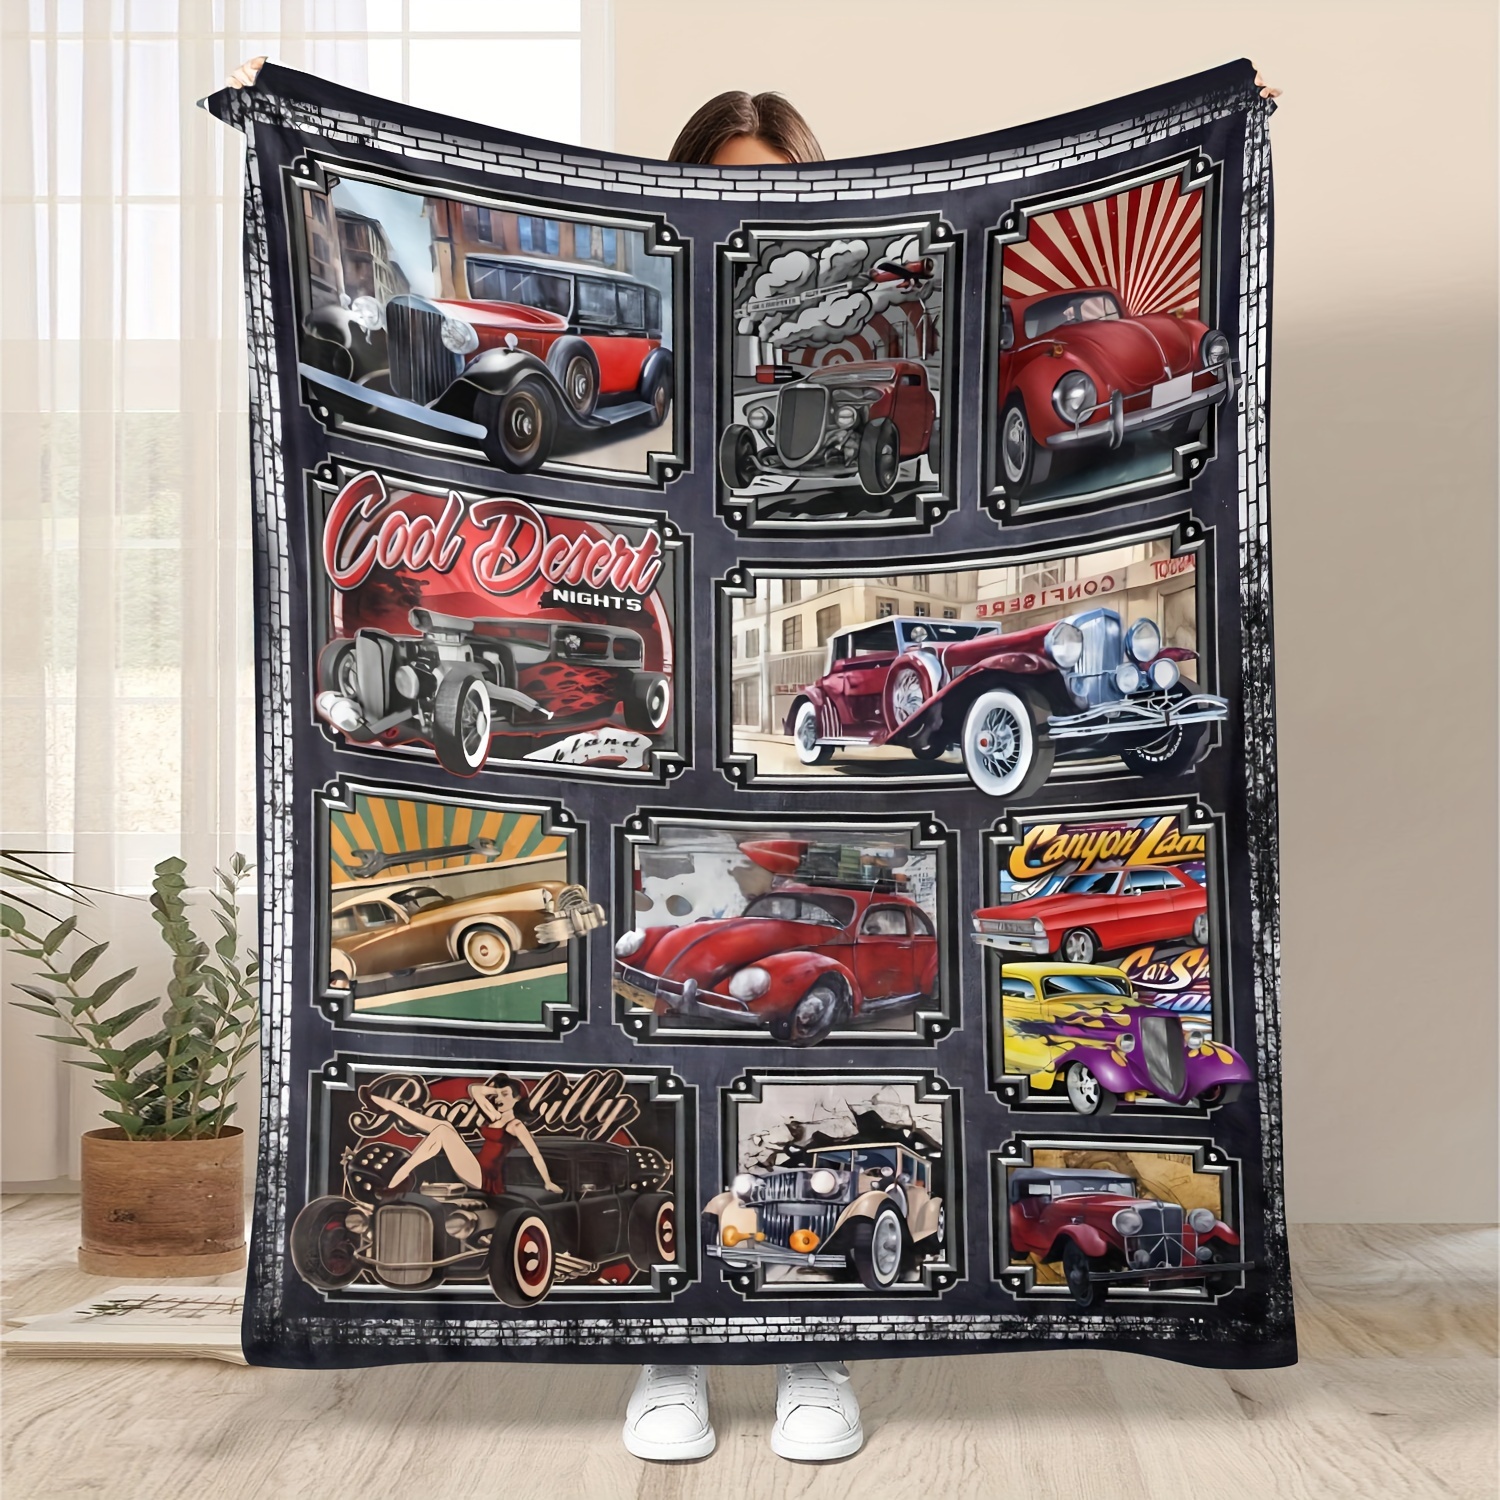 

1pc Stitching Vintage Classic Car Pattern Blanket Soft Flannel Sofa Blanket Warm Cozy Nap Throw Blanket For Bed Sofa Couch